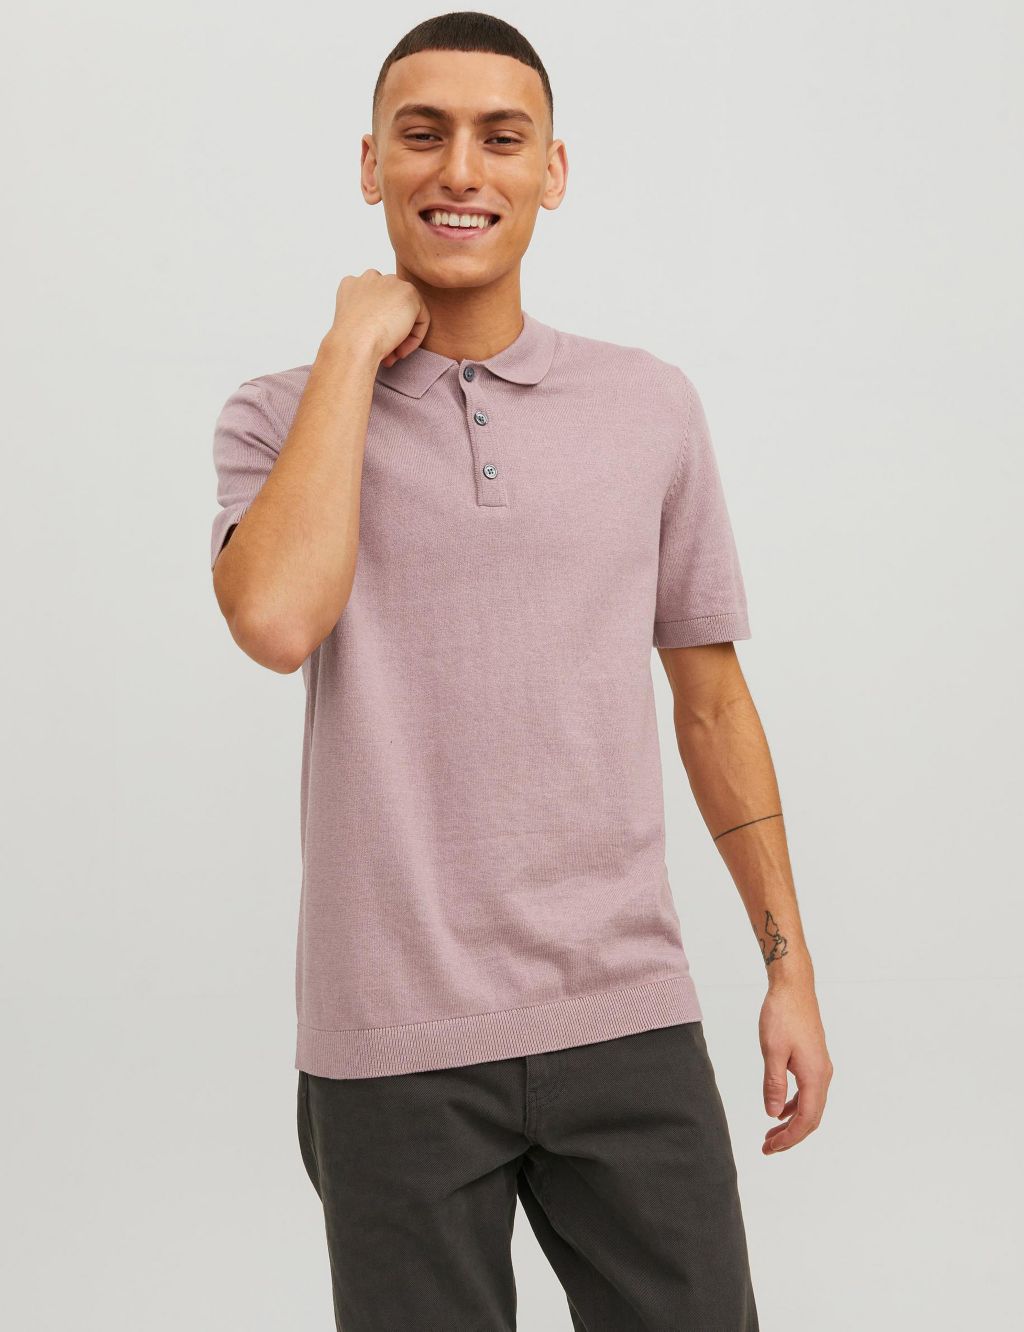 Cotton Rich Knitted Polo Shirt image 4